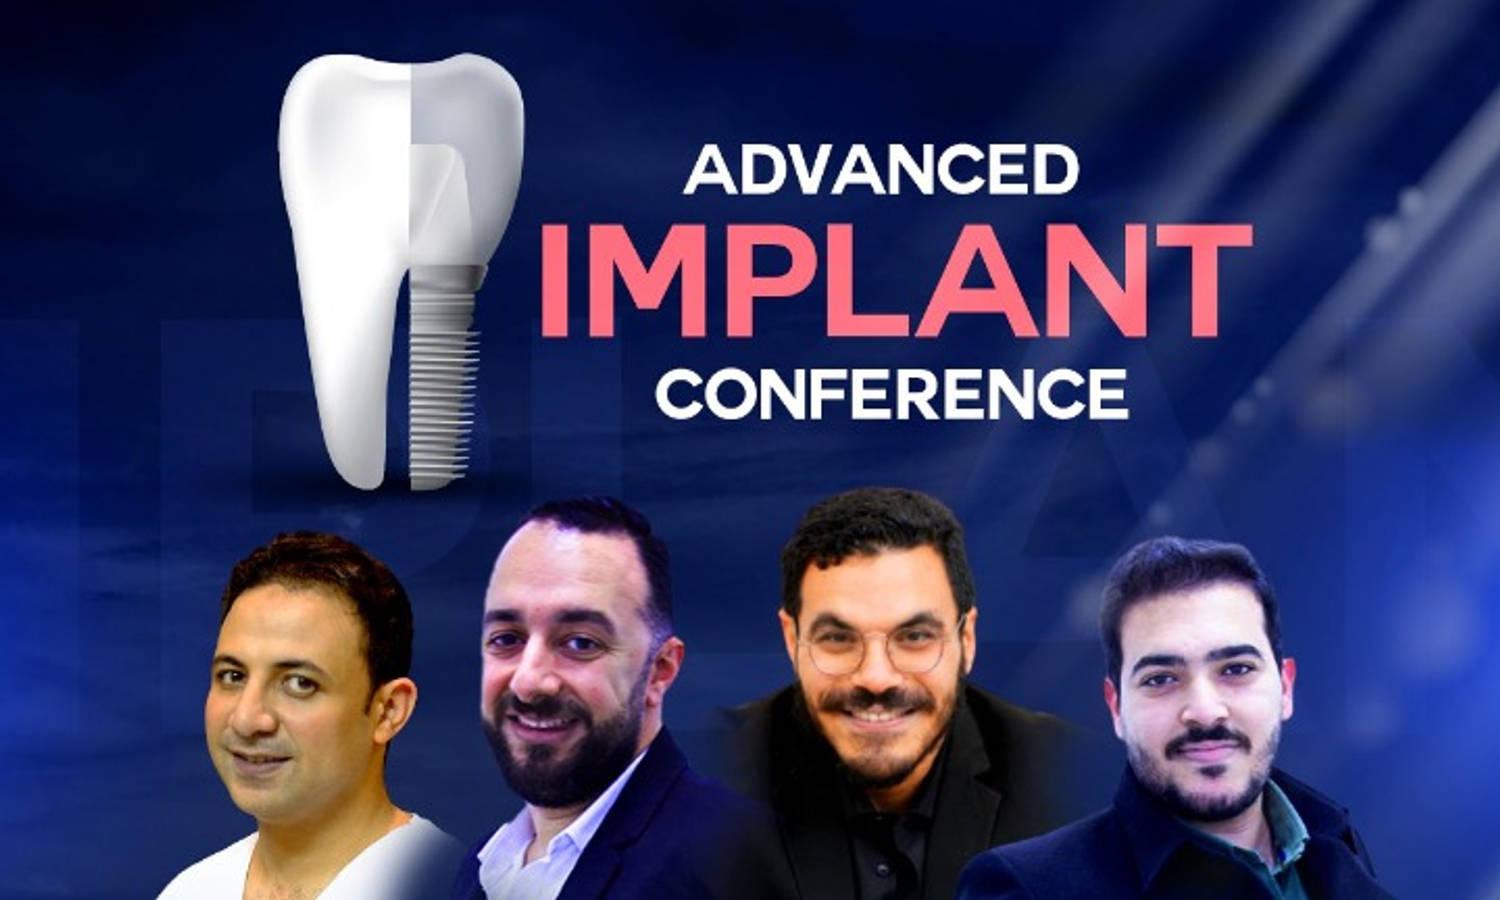 Advanced Implant Conference